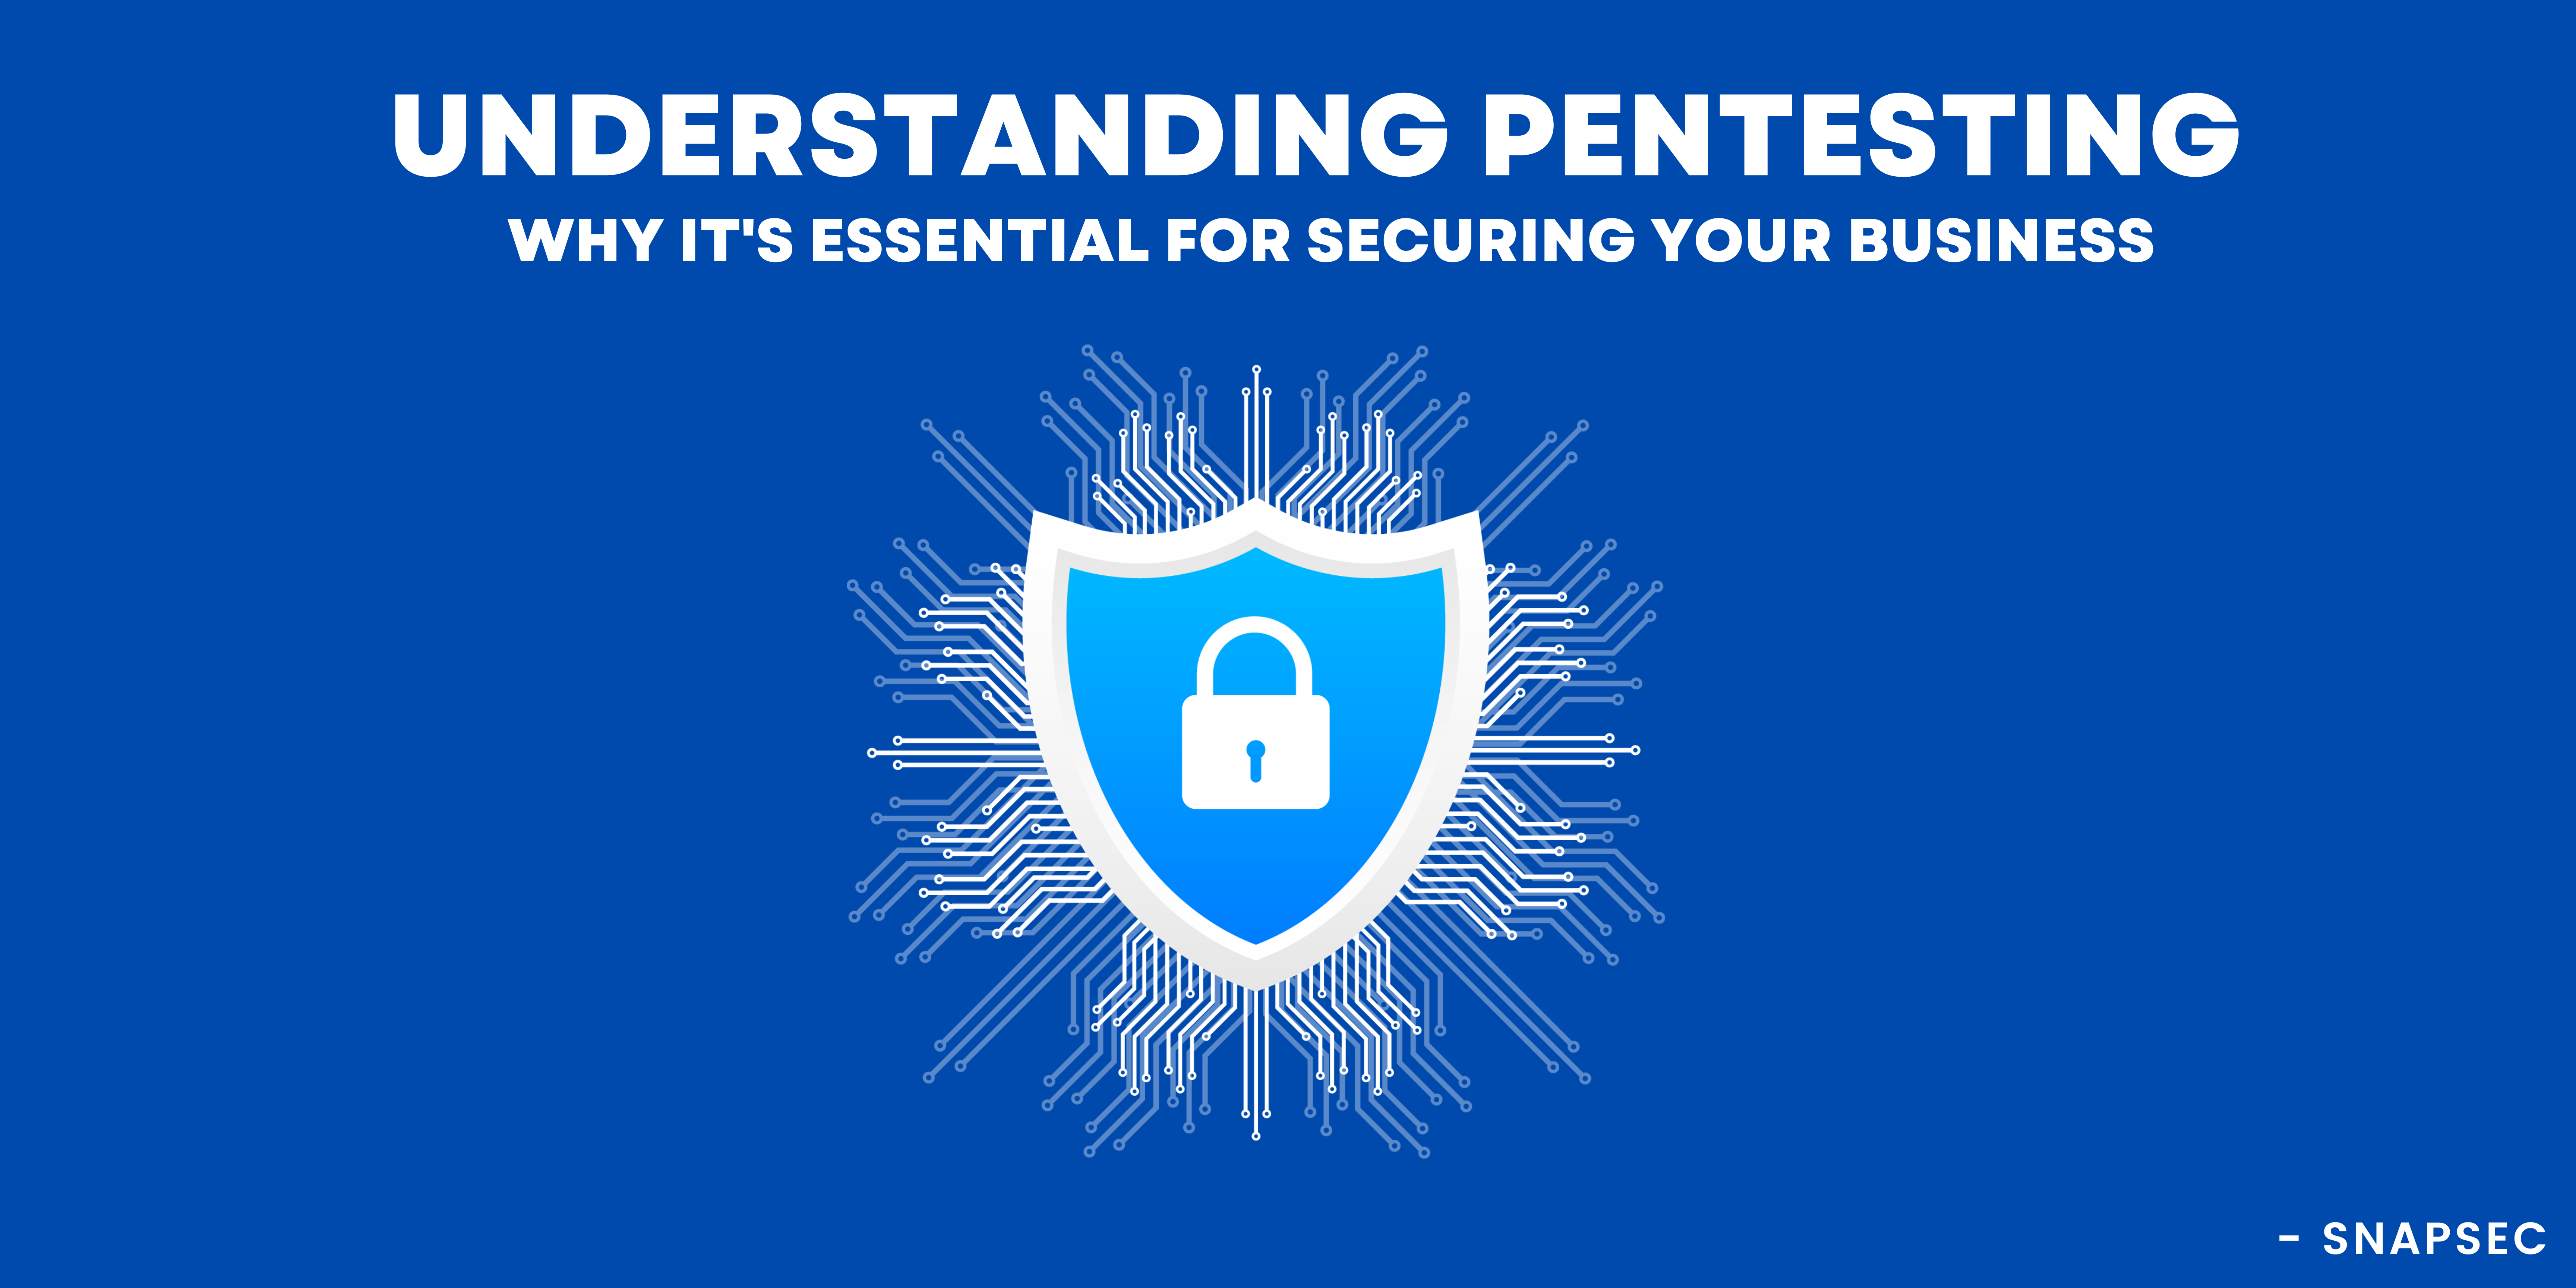 Understanding Pentesting: Why It's Essential for Securing Your Business